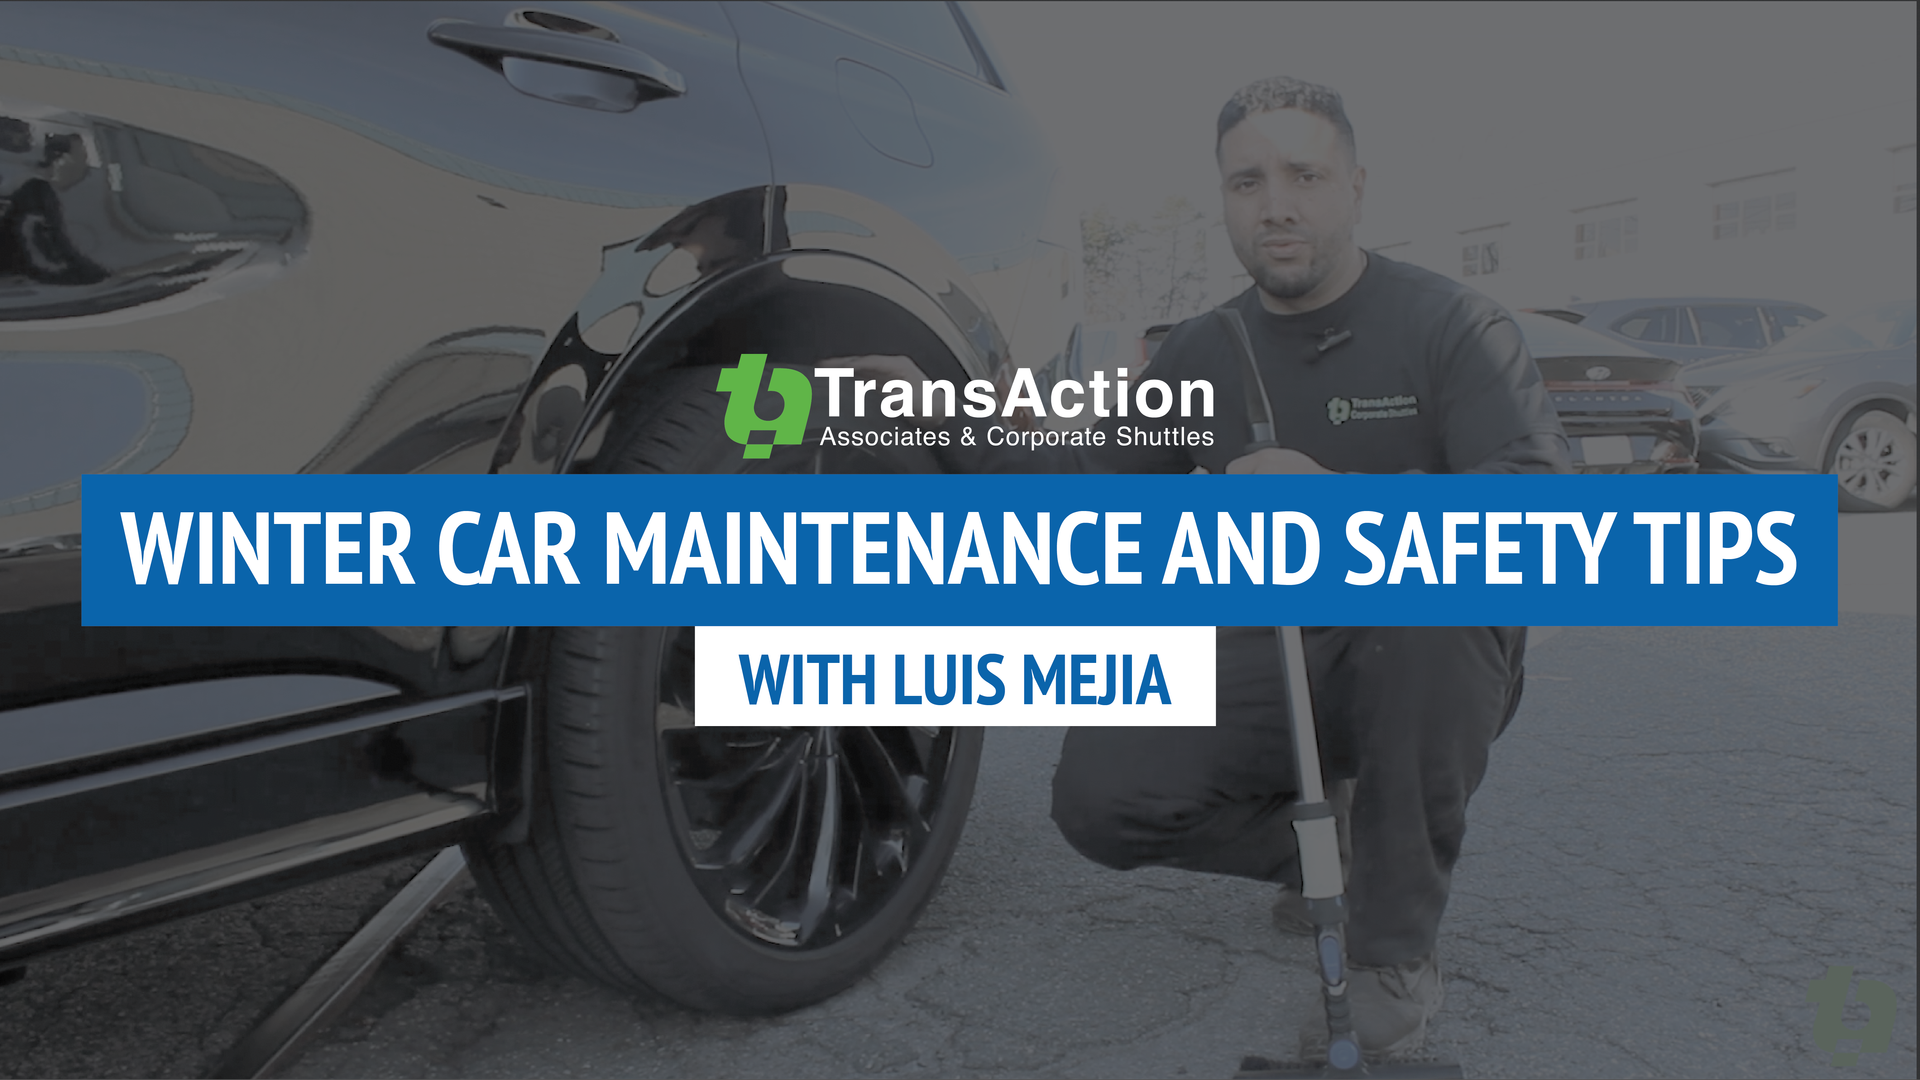 mechanic next to car, text: Winter Car Maintenance and Safety Tips with Luis